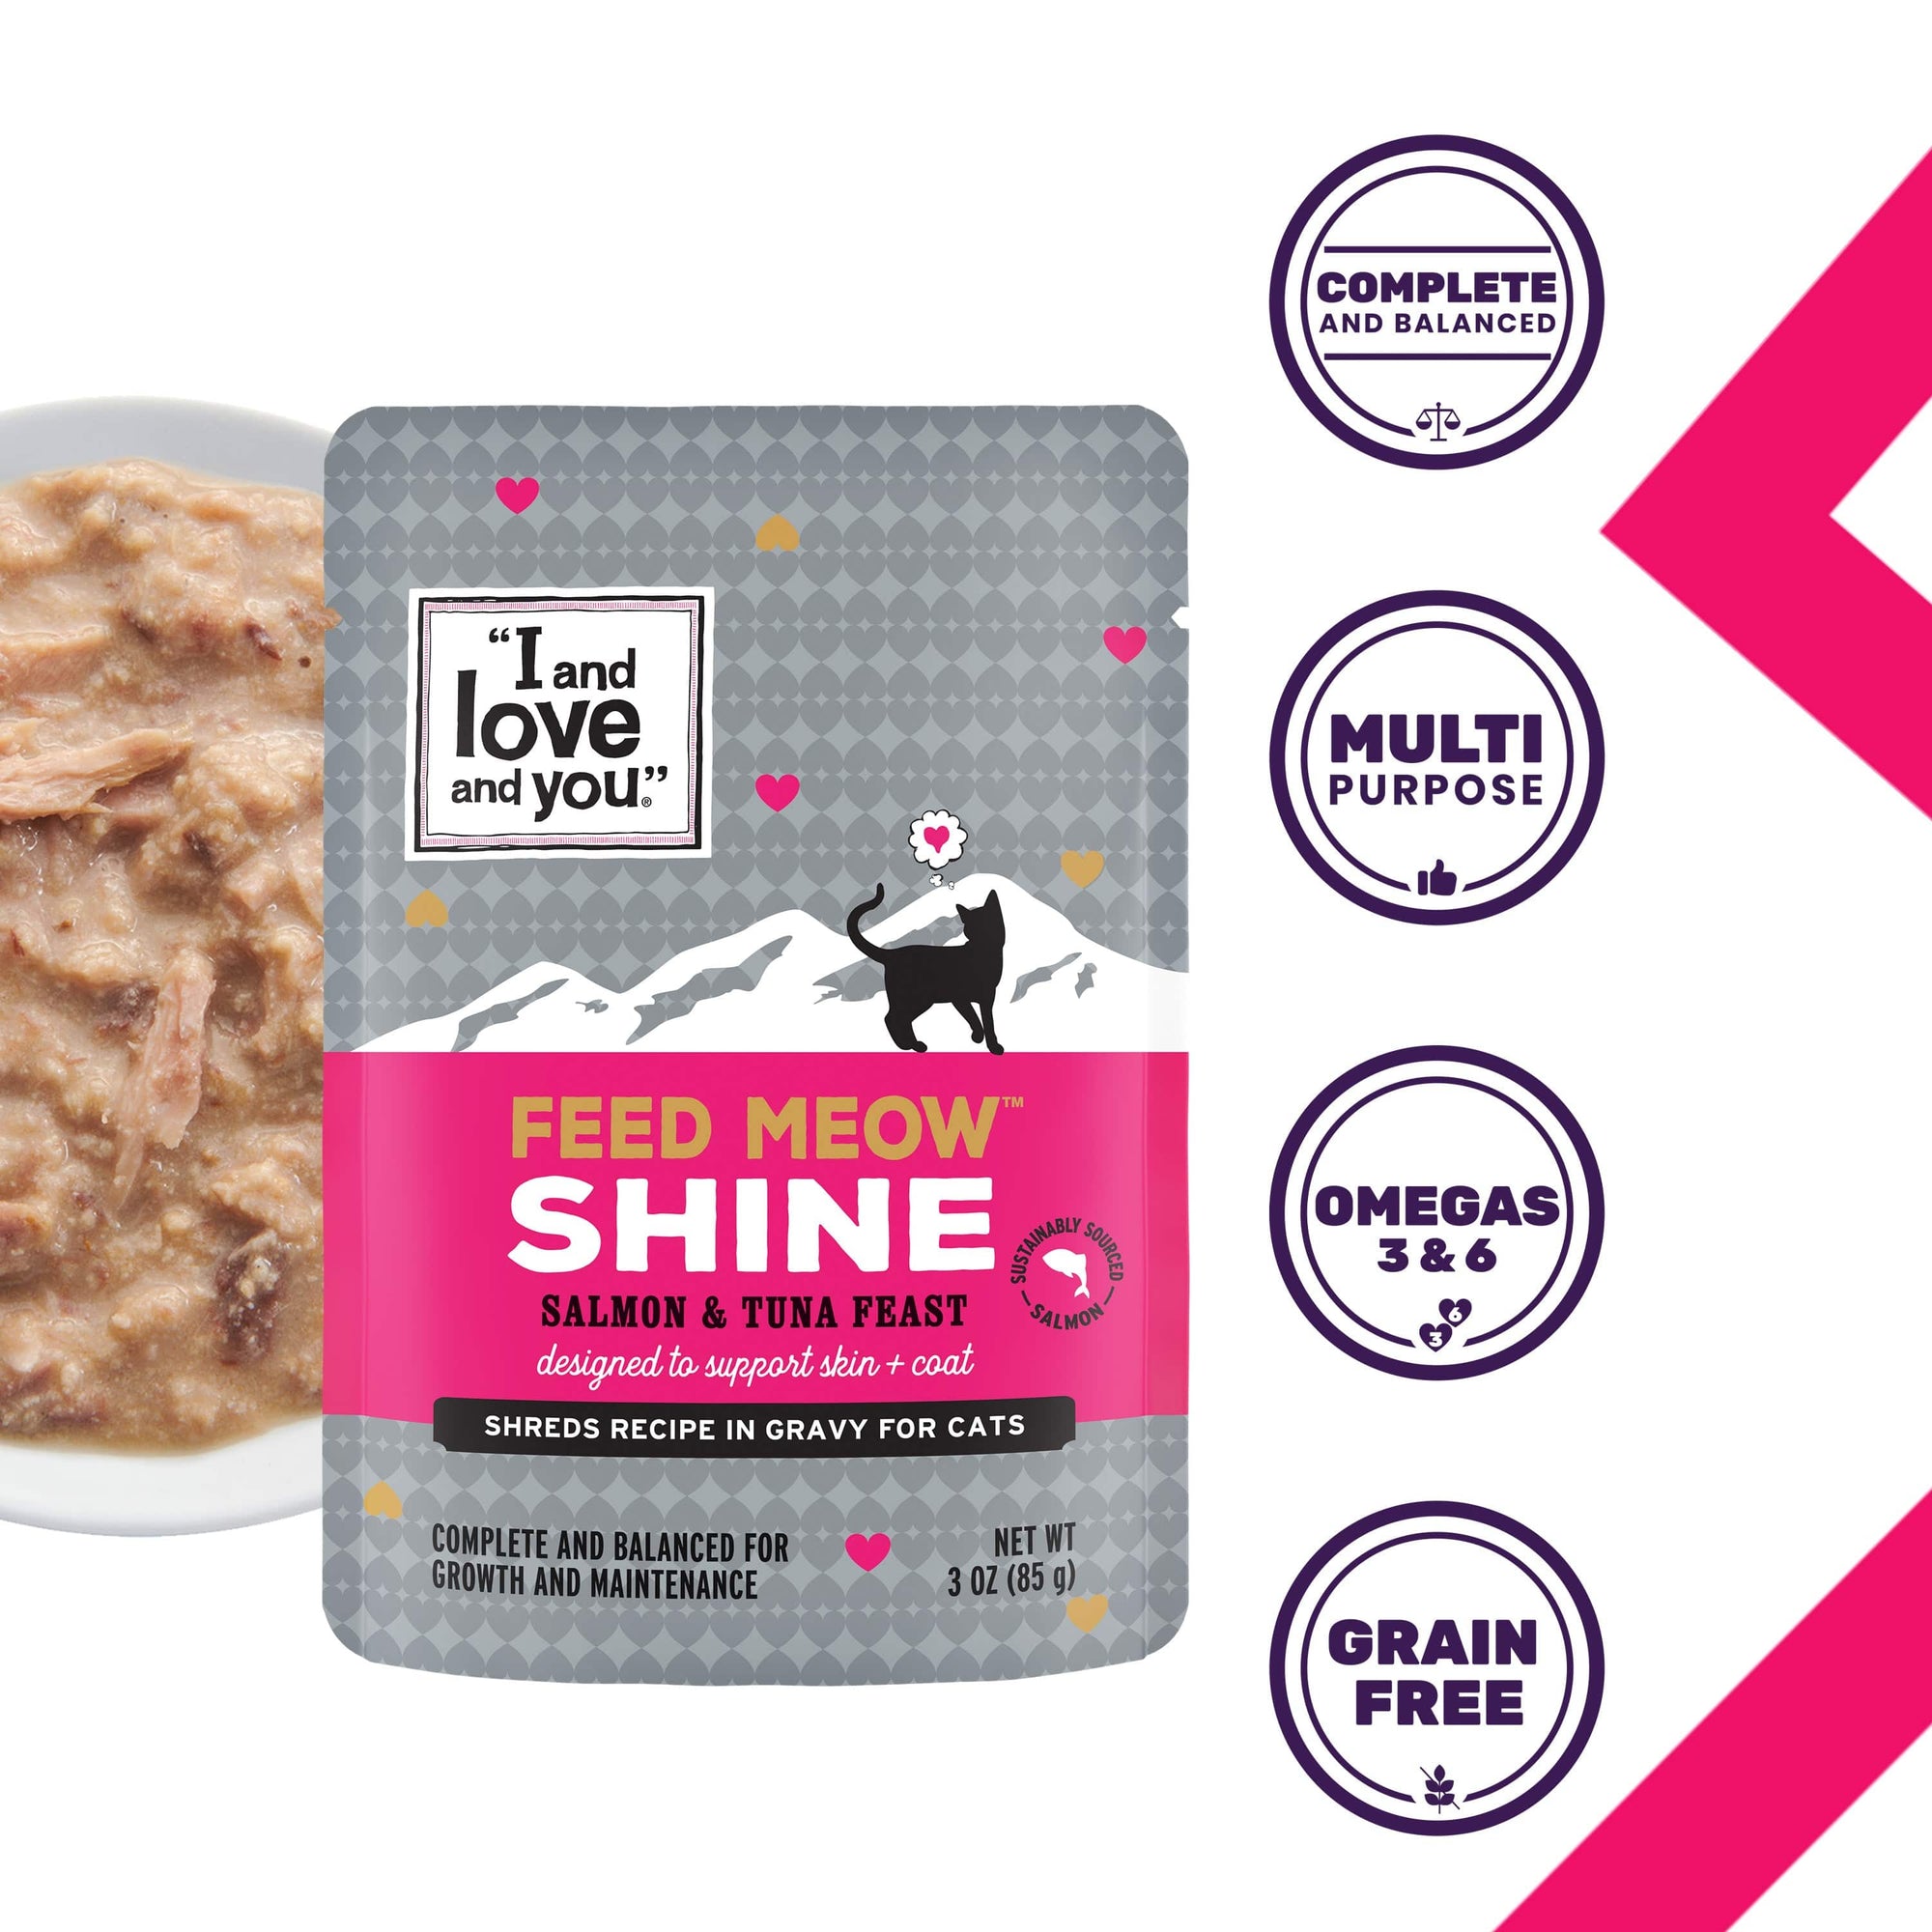 Feed Meow Shine cat food package with bowl, black cat, sign, and purple circles.